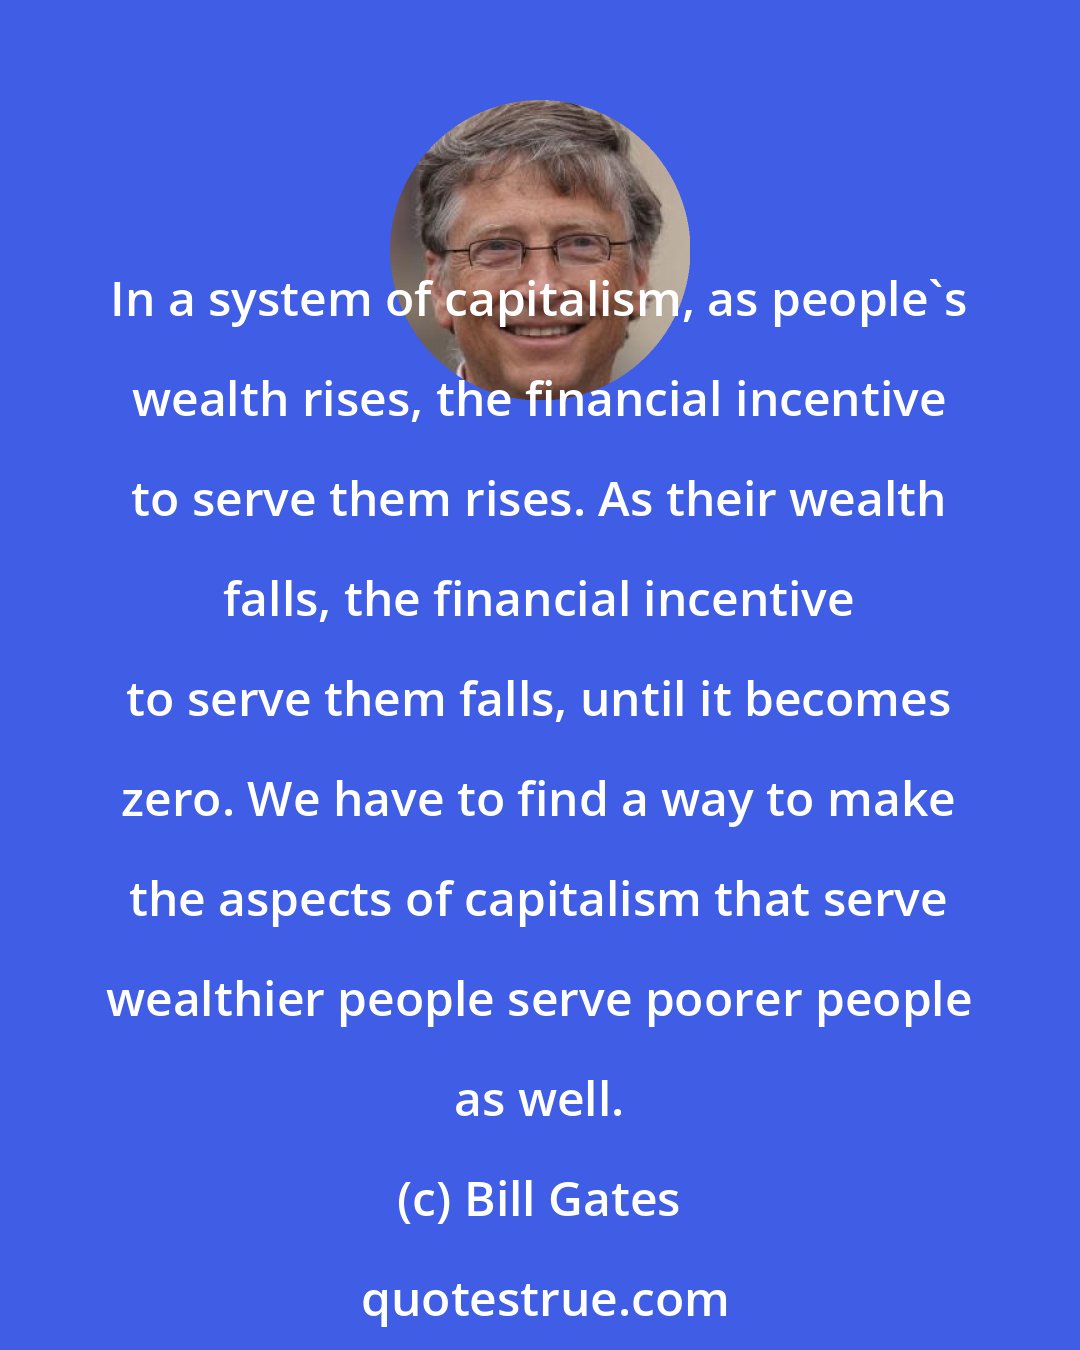 Bill Gates: In a system of capitalism, as people's wealth rises, the financial incentive to serve them rises. As their wealth falls, the financial incentive to serve them falls, until it becomes zero. We have to find a way to make the aspects of capitalism that serve wealthier people serve poorer people as well.